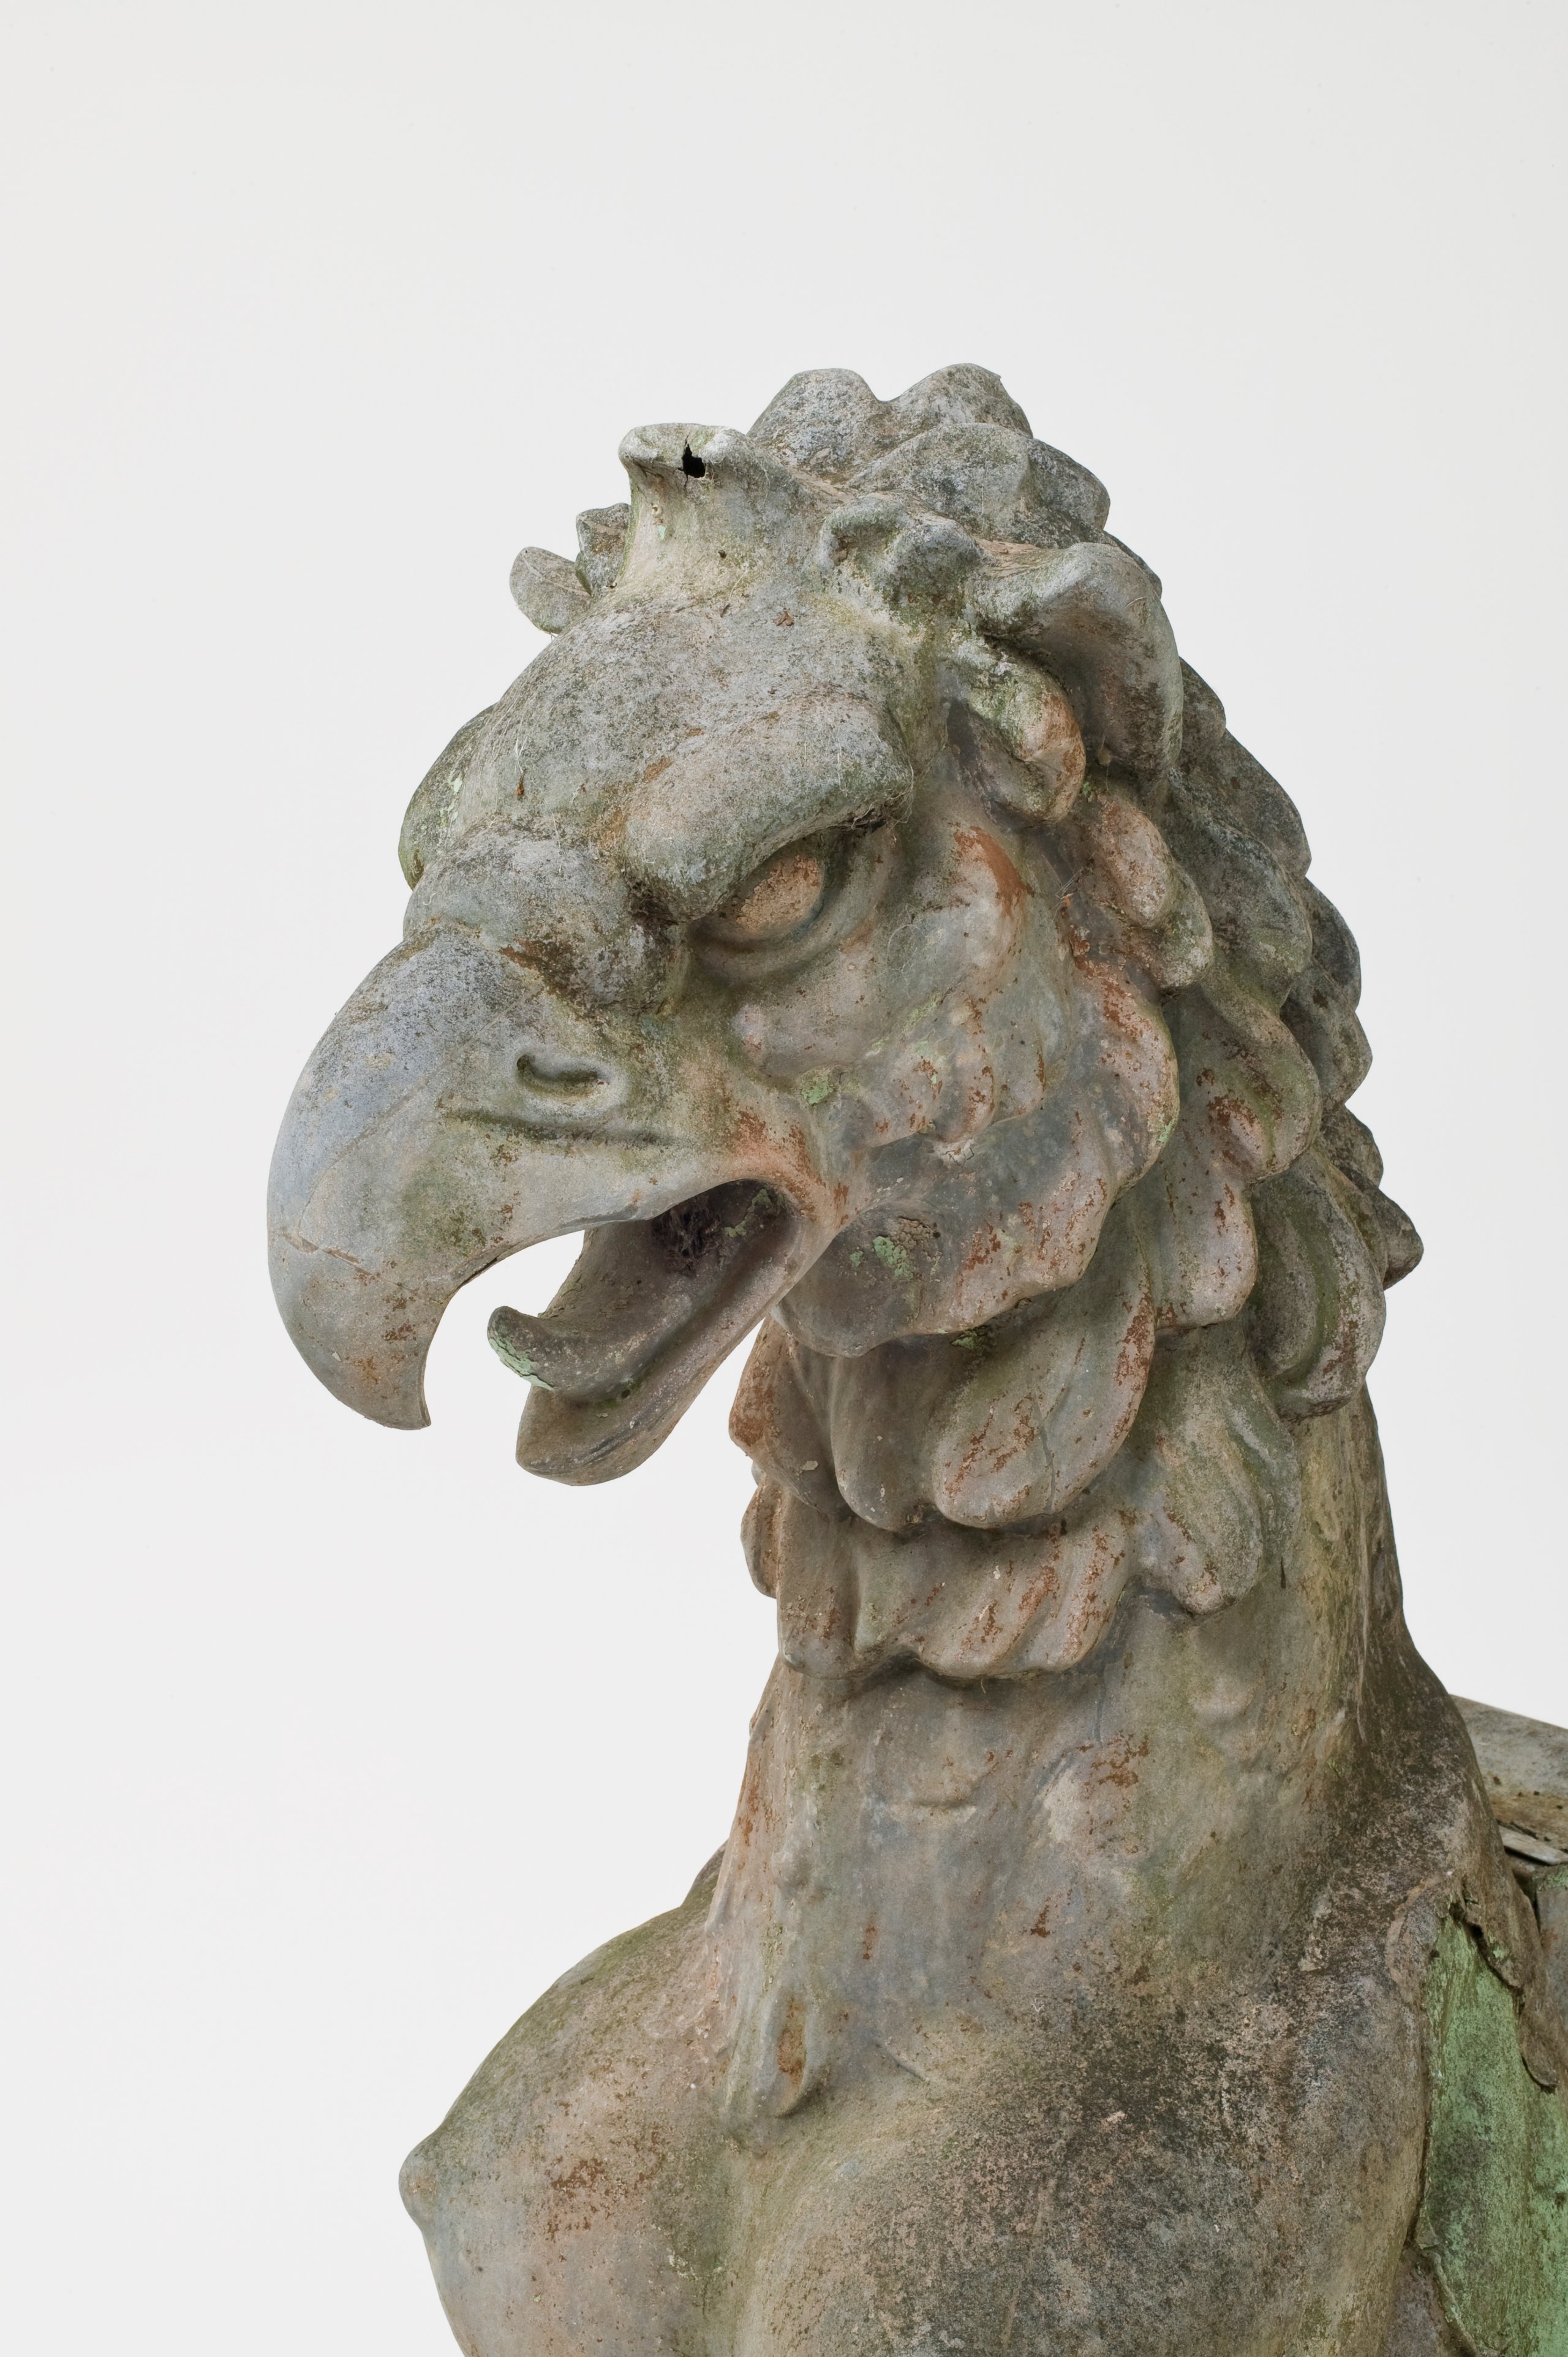 Sculpture of a griffin made by Wunderlich